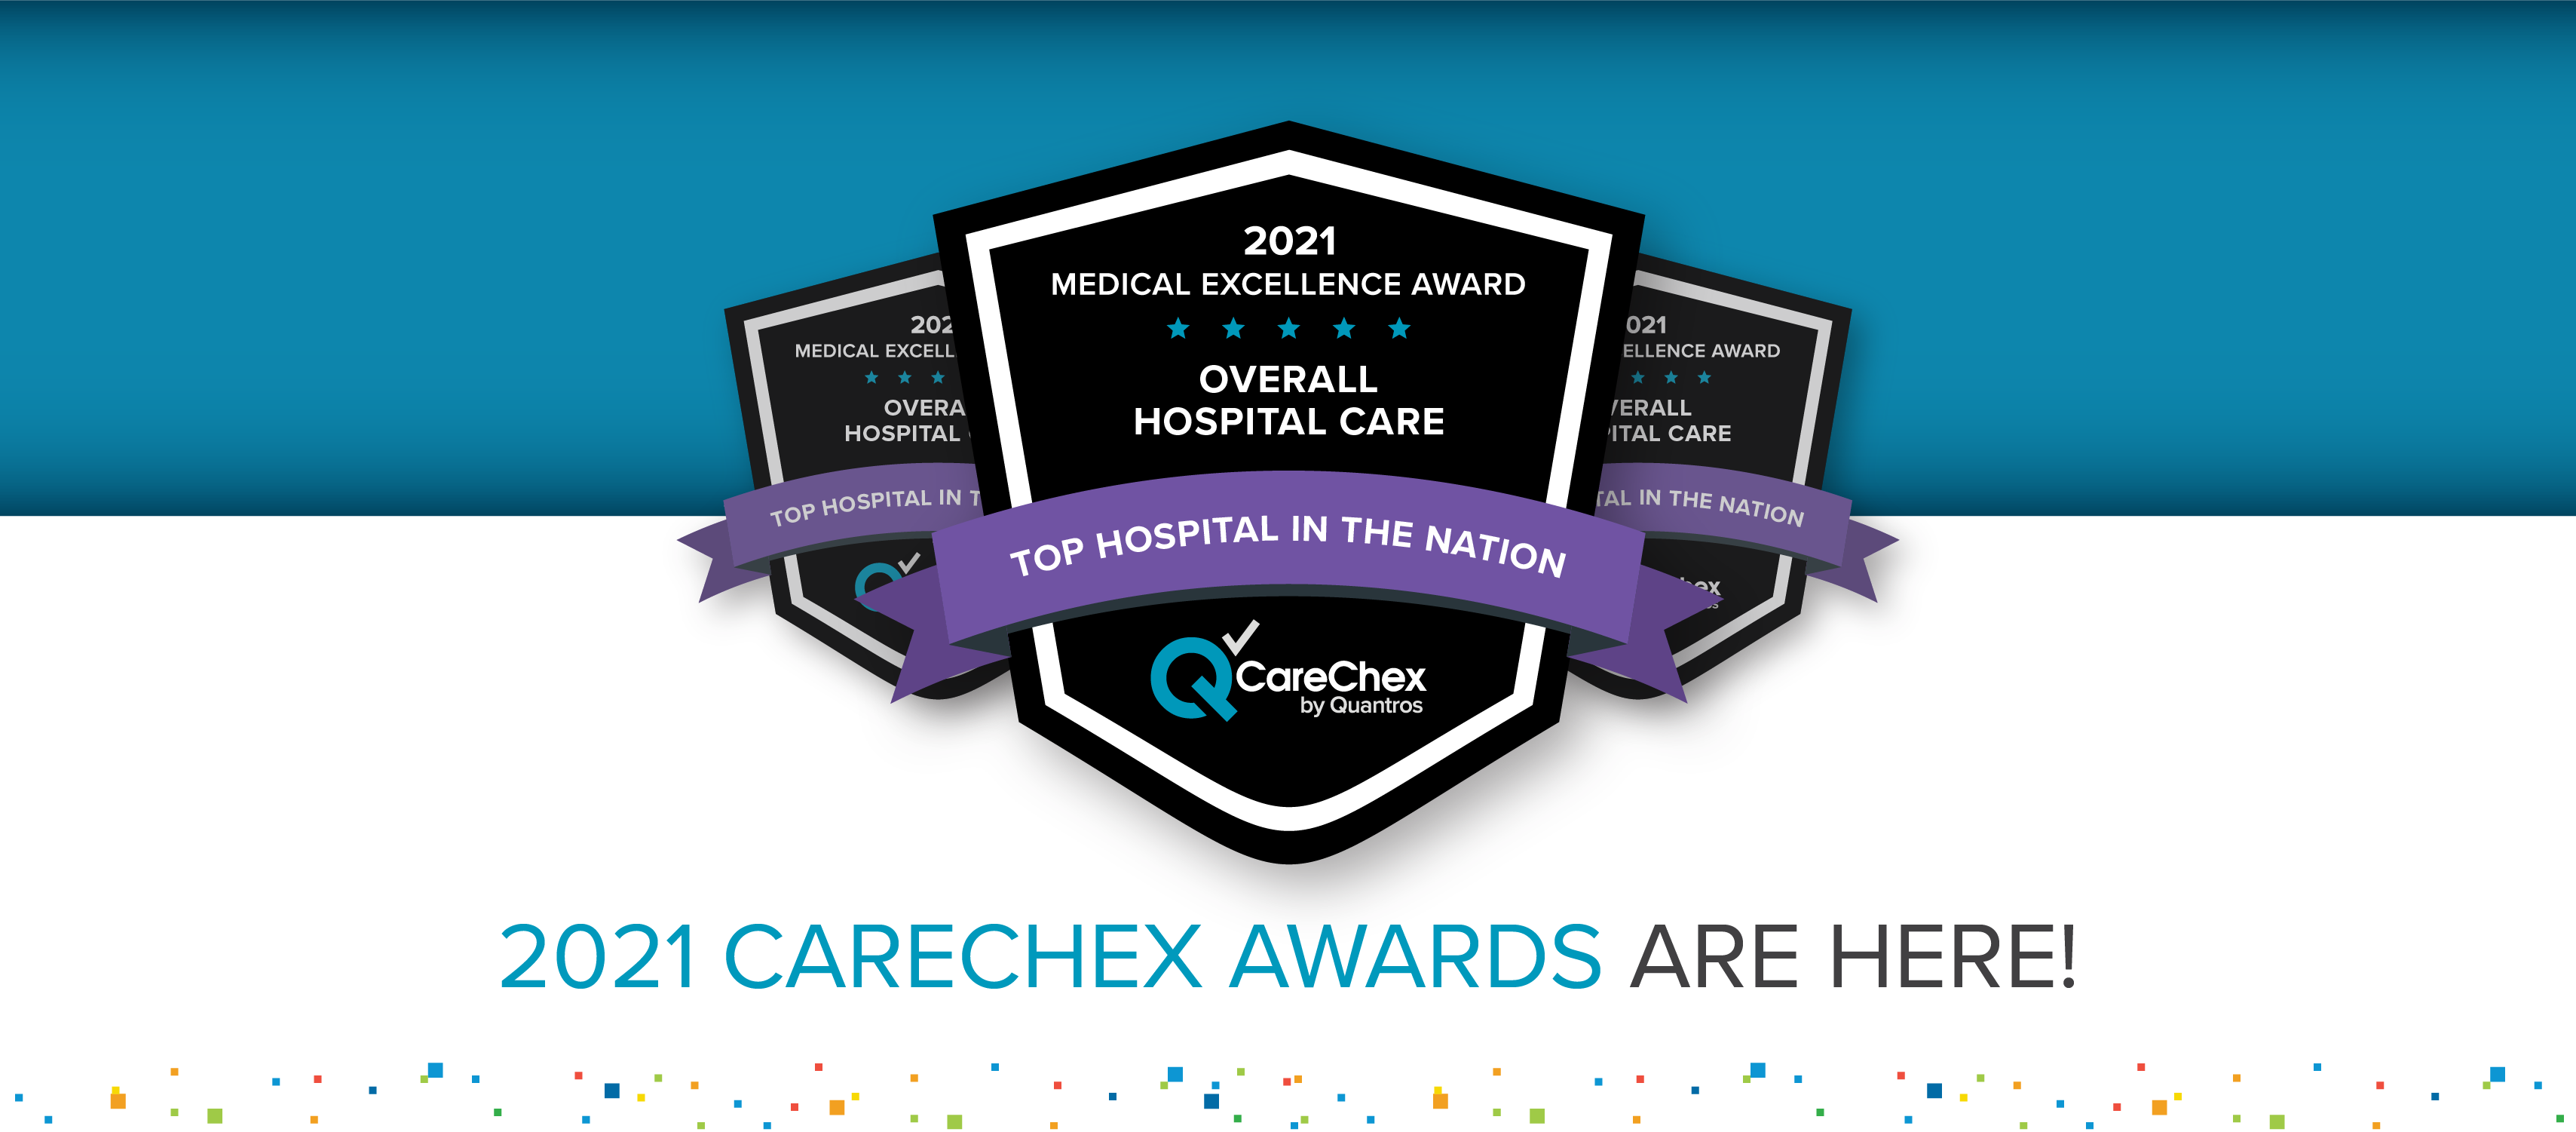 2021 CareChex Awards Are Here!